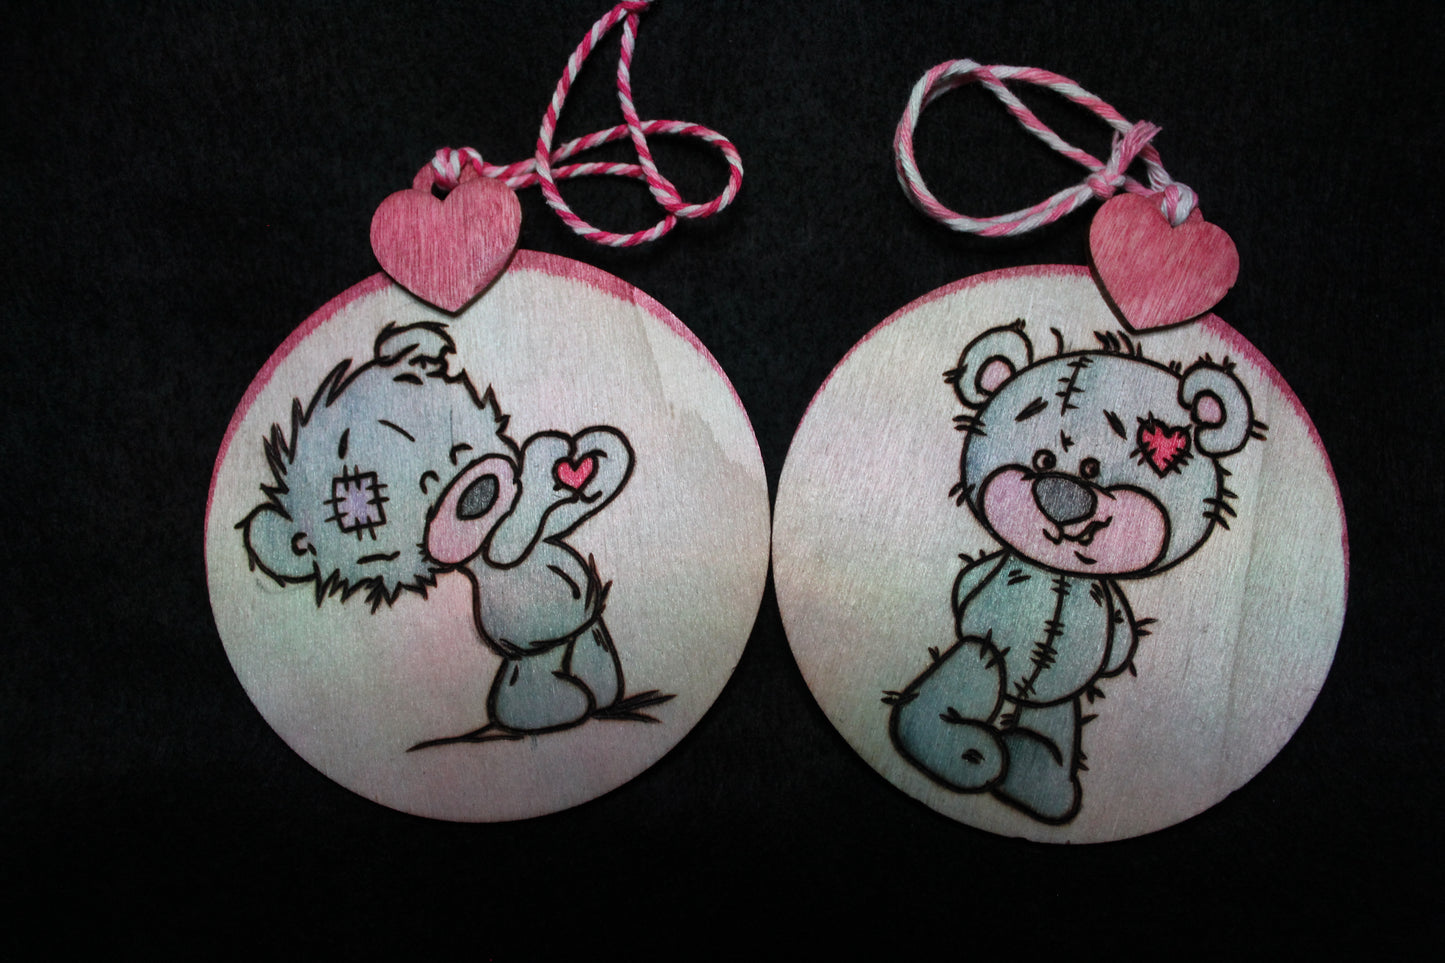 Valentines Ornaments "FUZZY LOVE" - 'Pyrographics by The Ragdoll Princess'